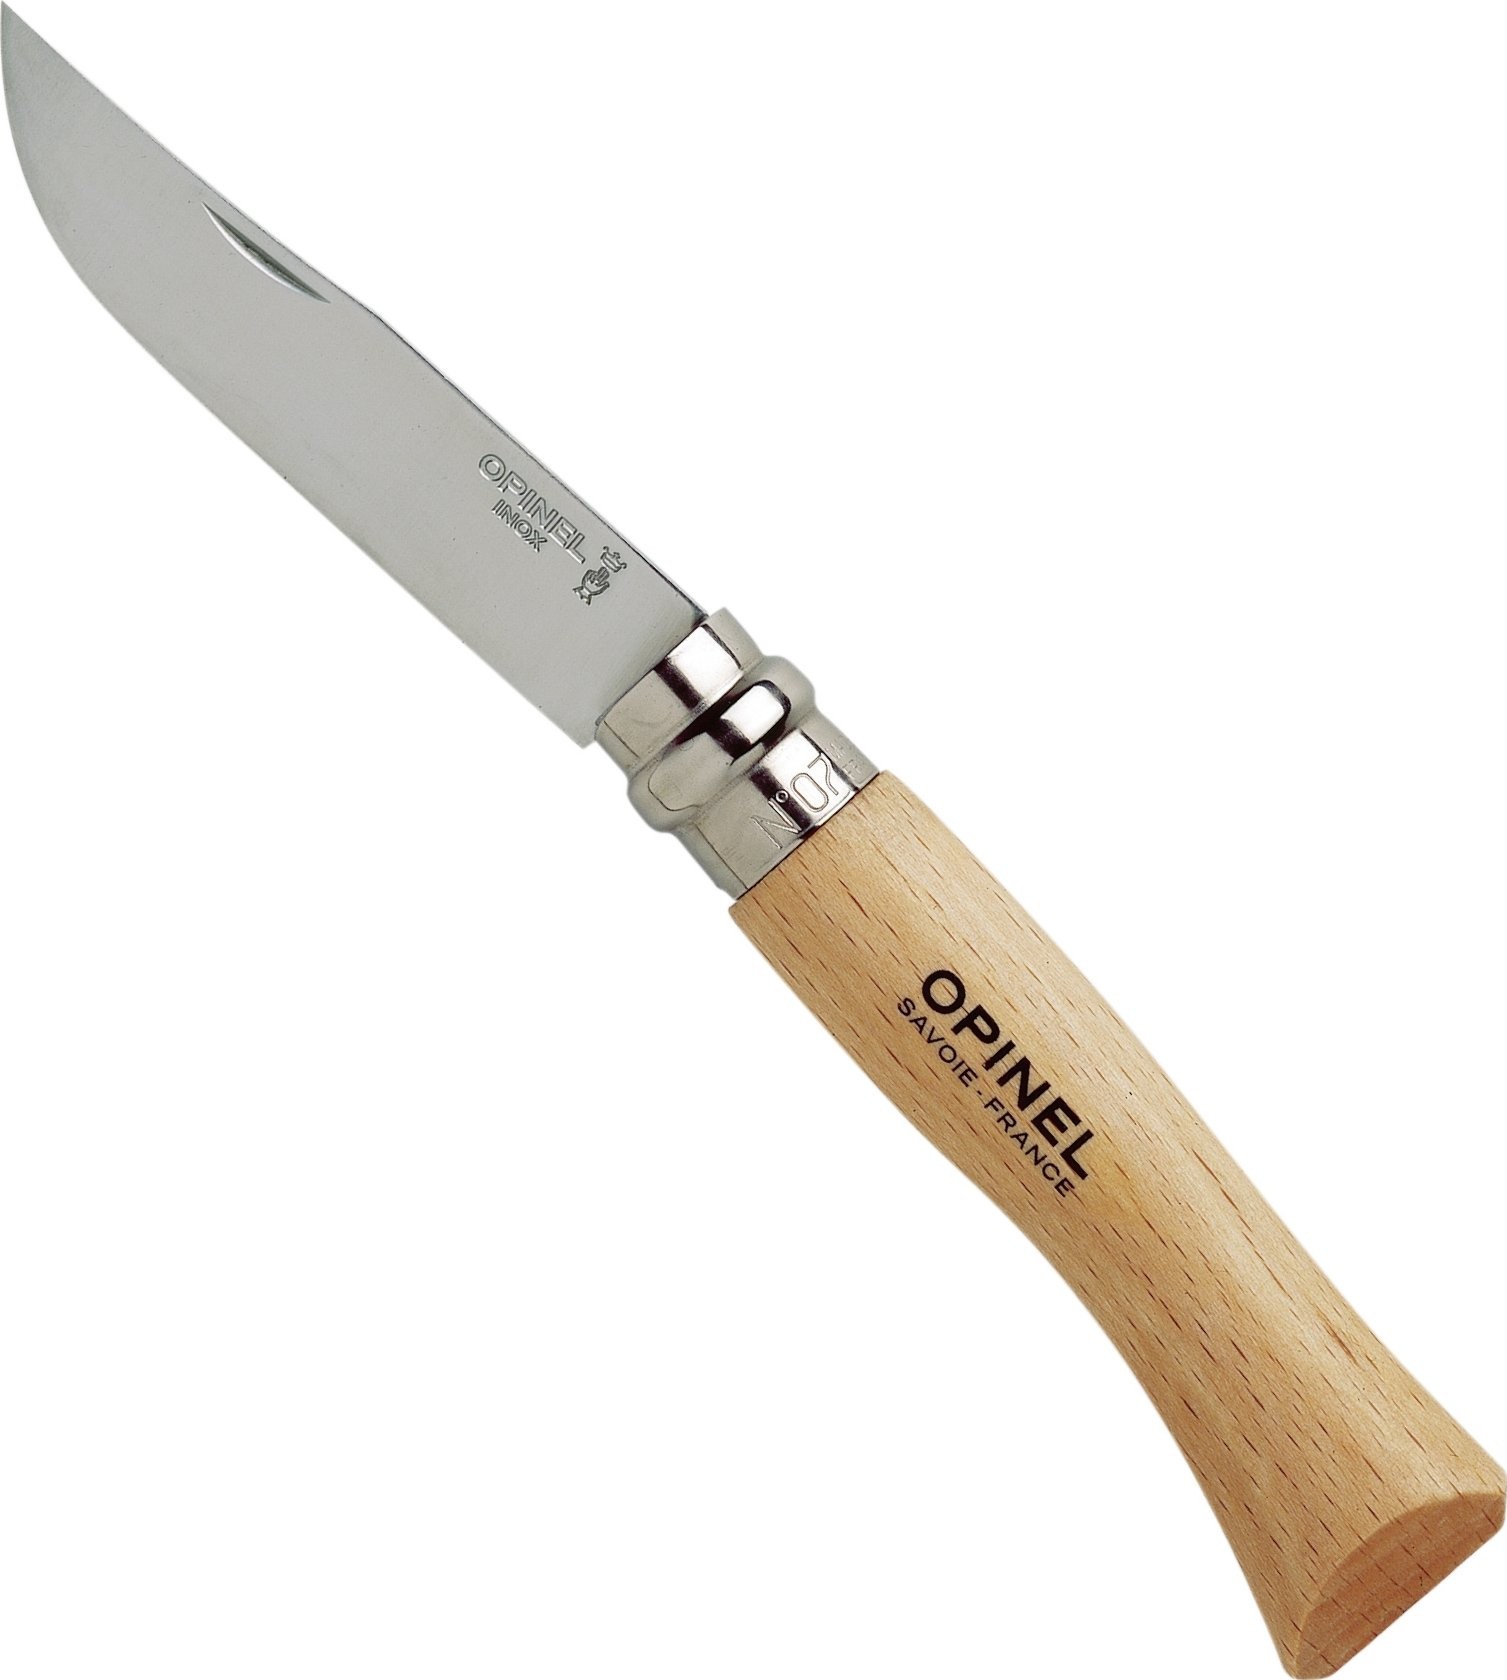 Opinel No.7 stainless steel